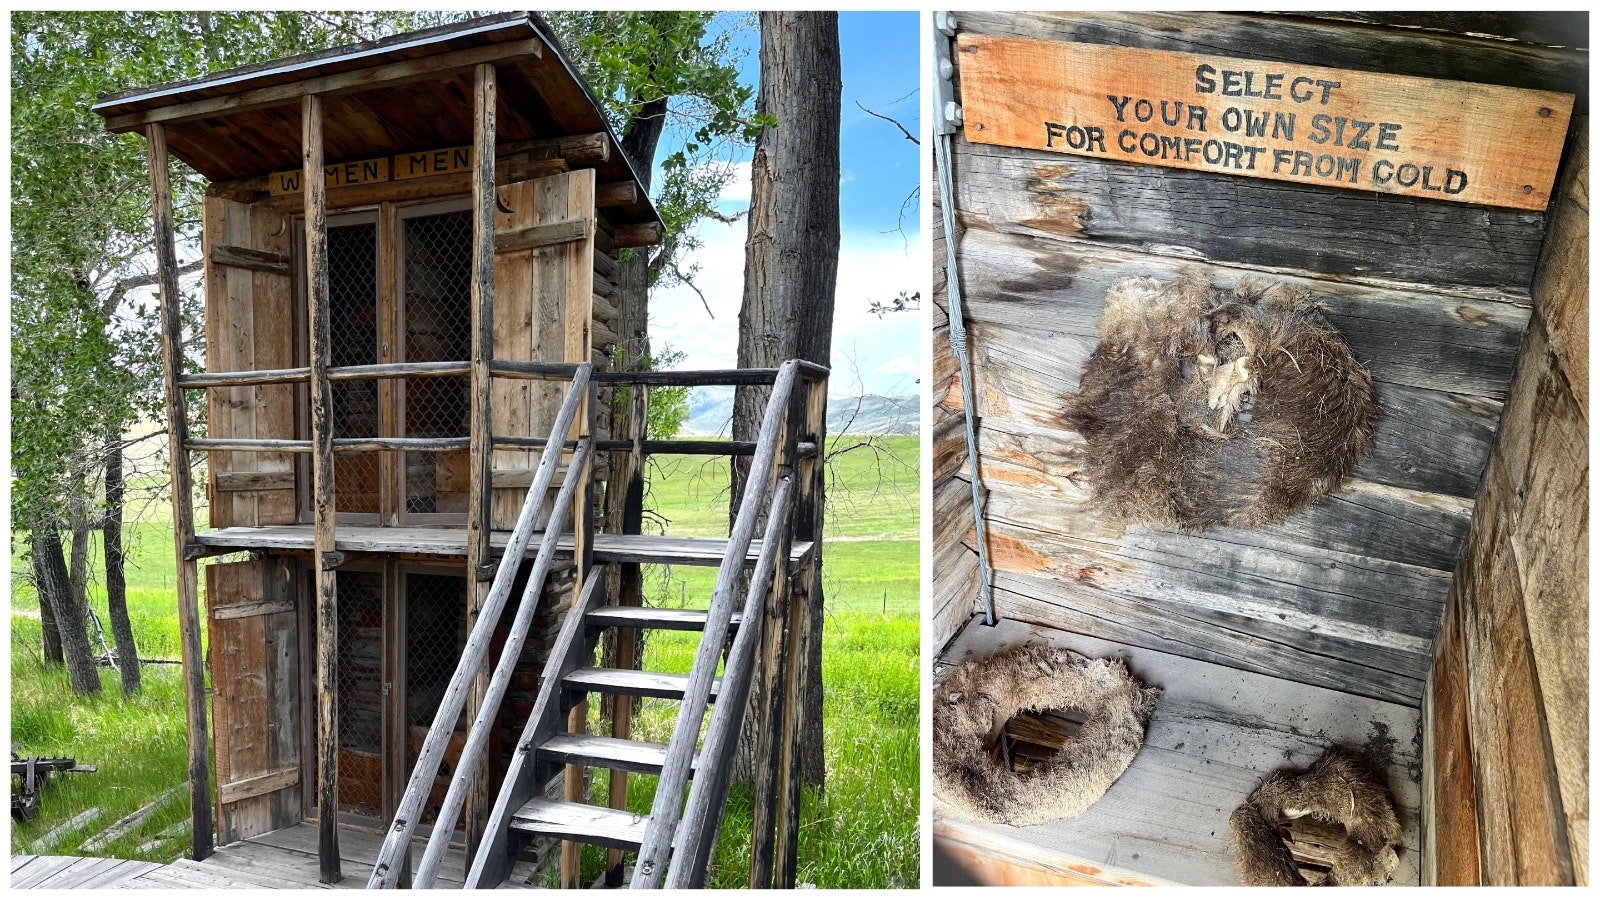 The two-story outhouse at the Grand Encampment Museum may seem odd, but actually makes sense. The second story isn't for volume use, its to use when the snow's so deep the bottom level is blocked. Also, the holes have luxurious beaver pelt covers.